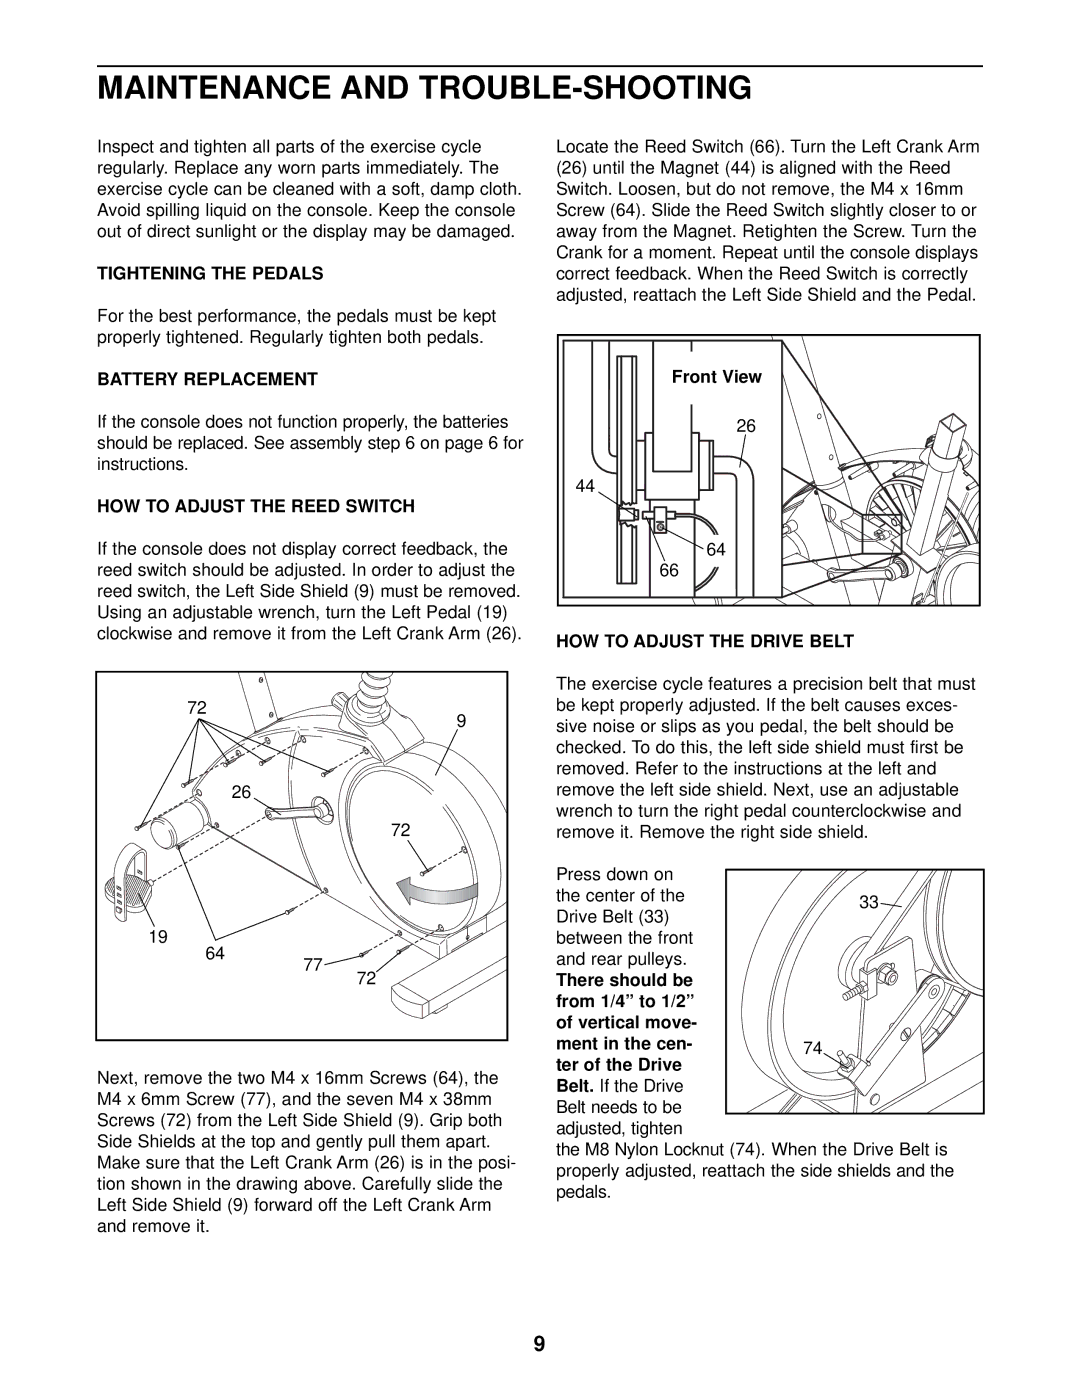 NordicTrack NTEX03990 user manual Maintenance and TROUBLE-SHOOTING, Tightening the Pedals, Battery Replacement 